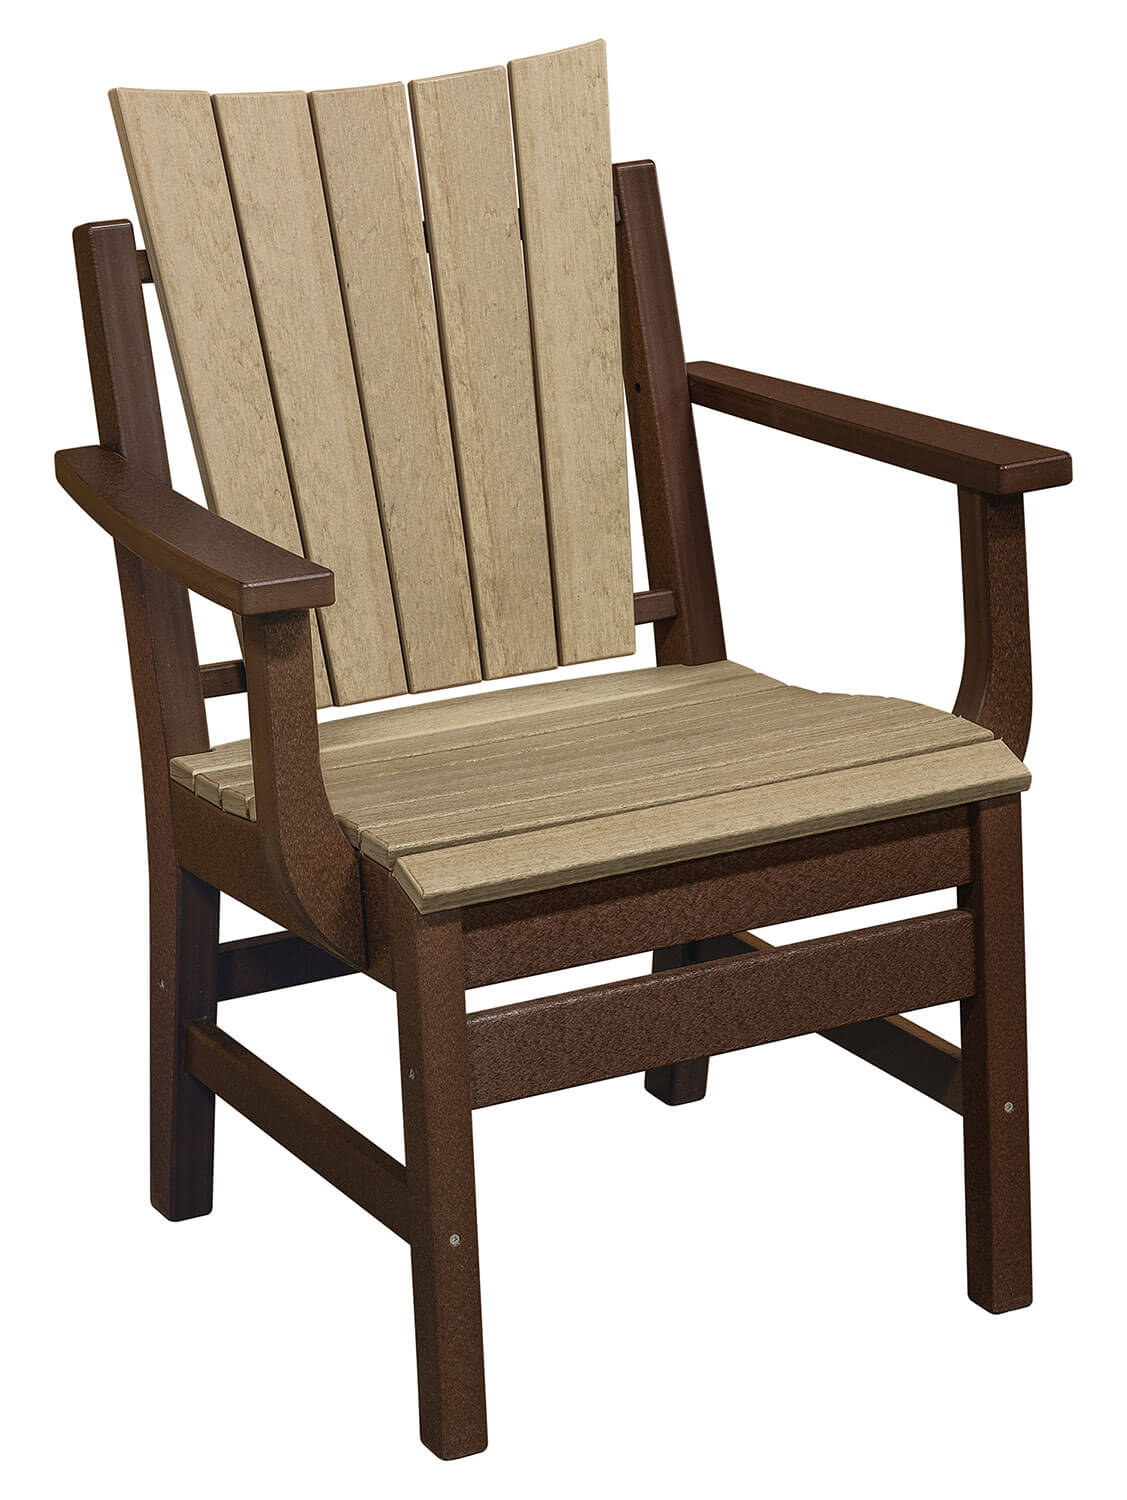 EC Woods Shawnee Contemporary Outdoor Poly Dining Height Chair Shown in Birch Wood and Tudor Brown